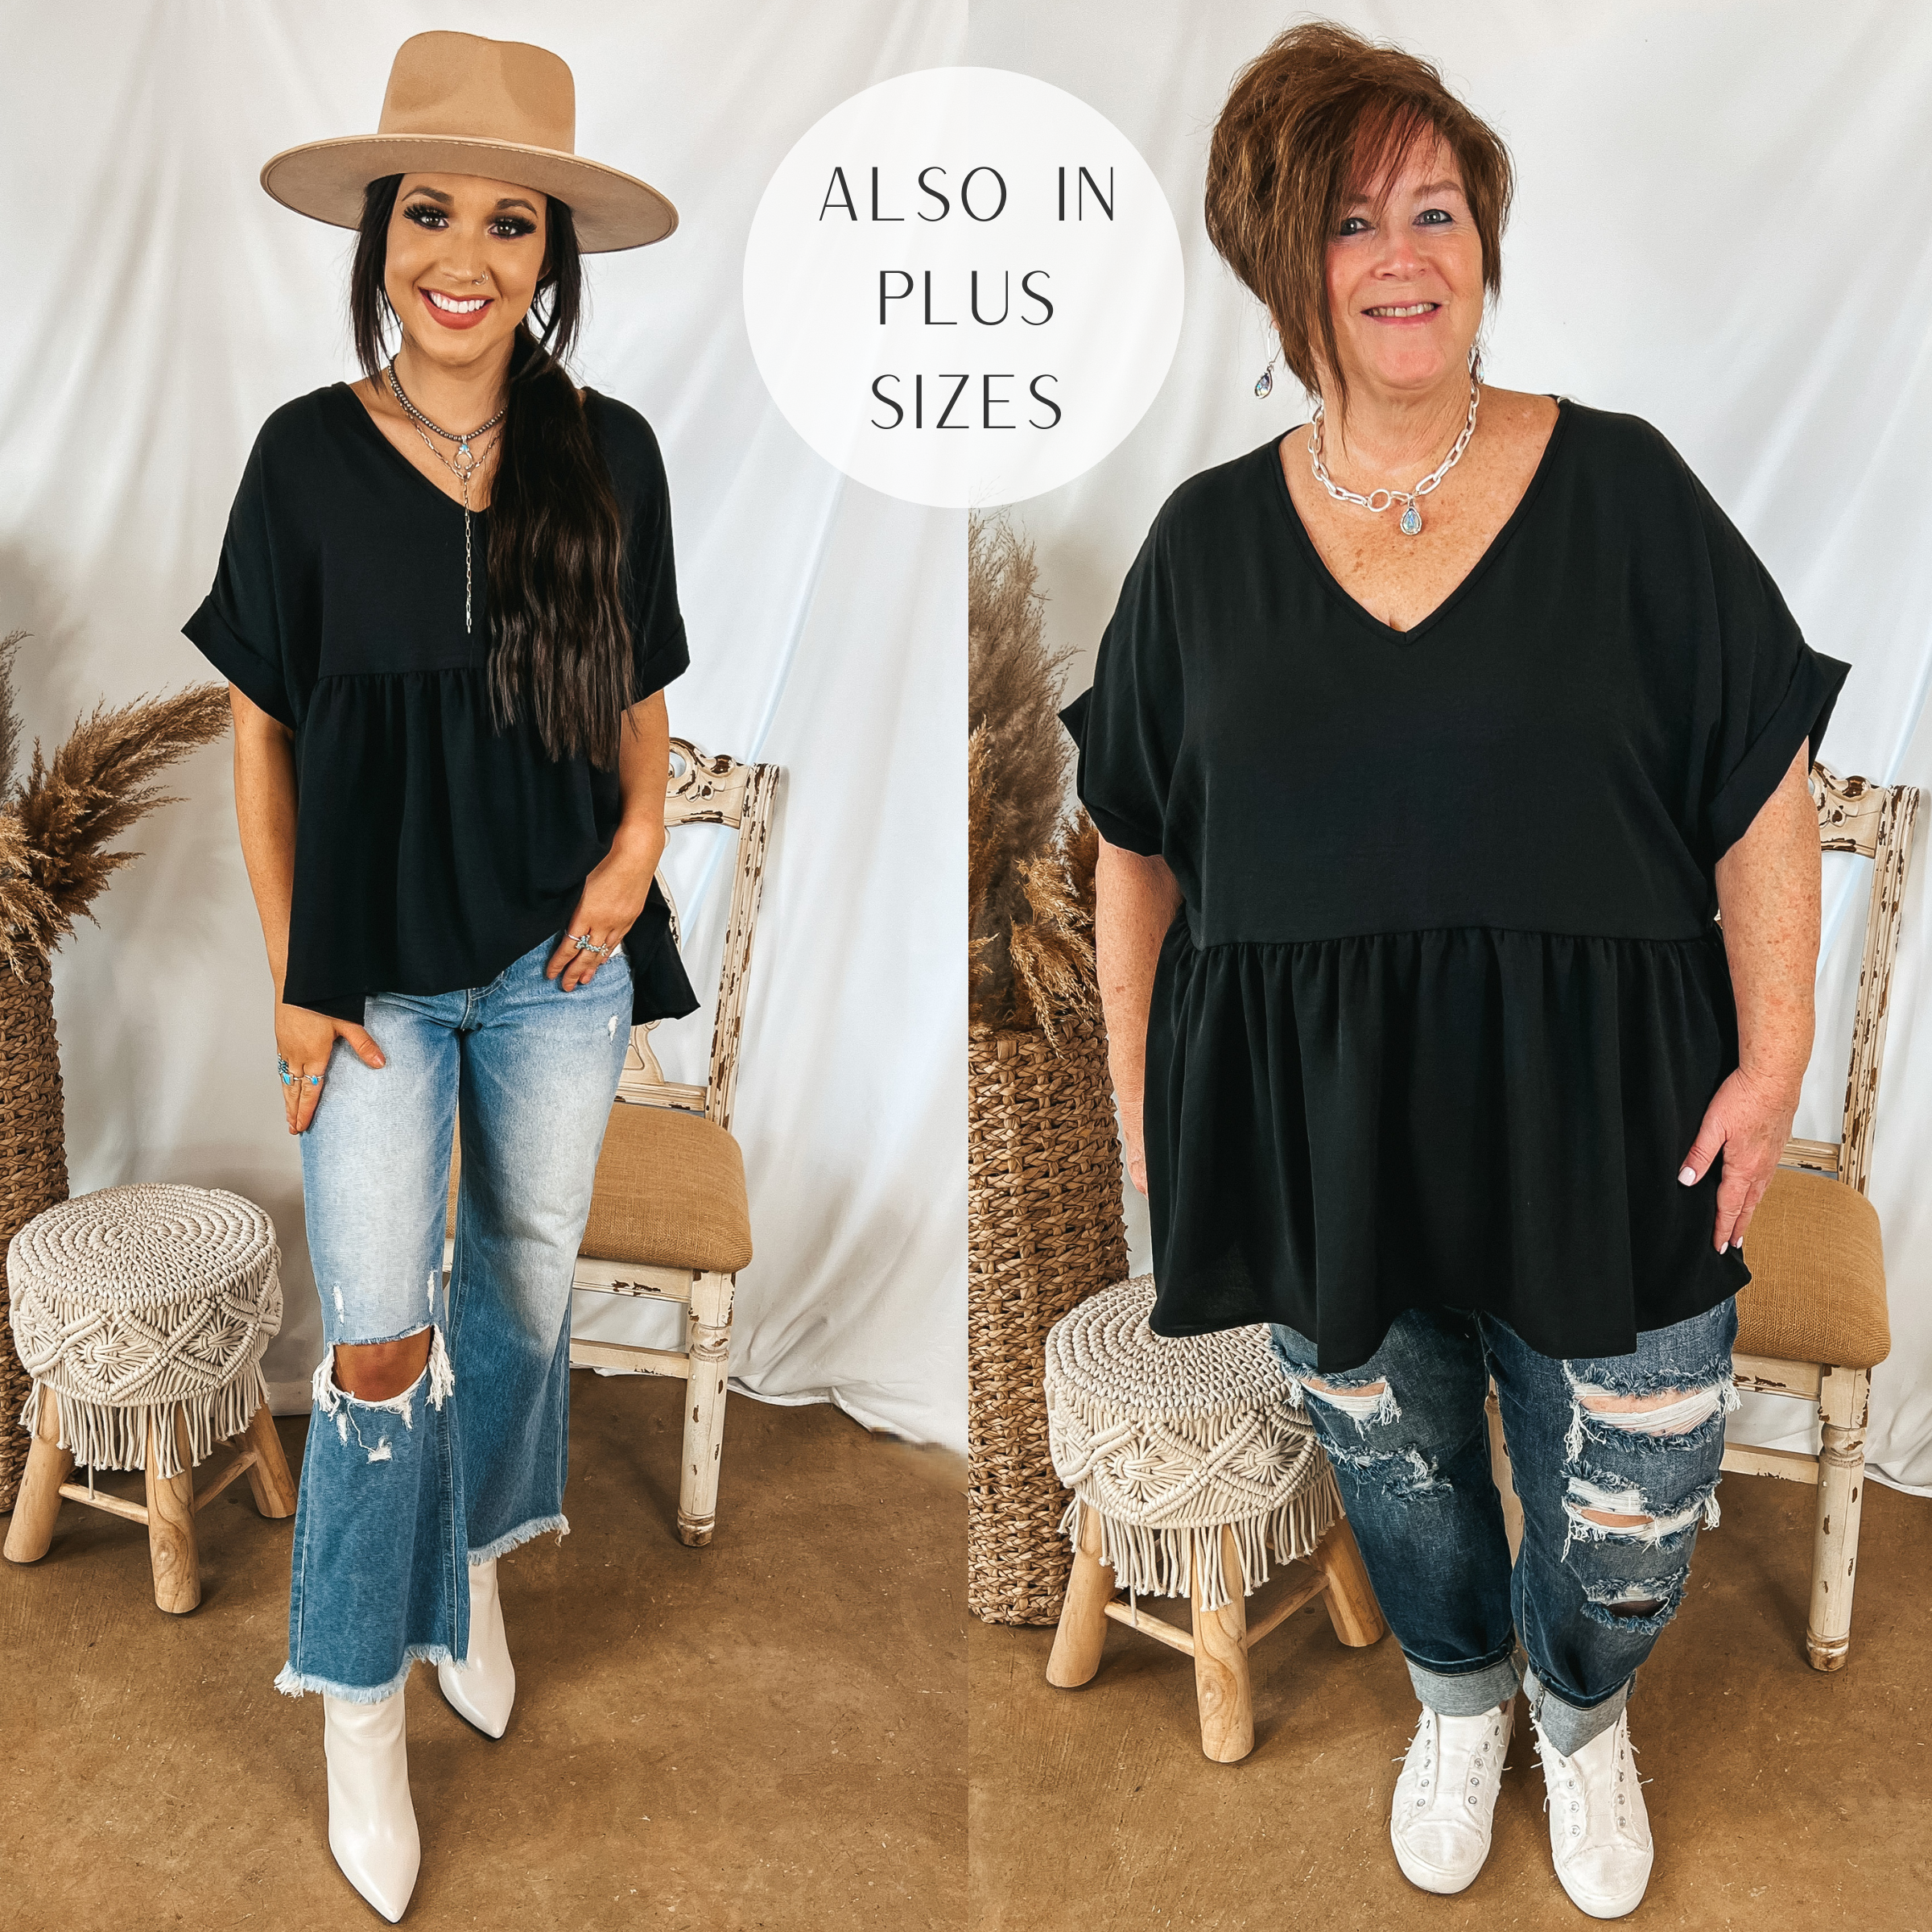 Models are wearing a black short sleeve babydoll top that has a v neckline. Size small model has it paired with cropped jeans, white booties, and a tan hat. Plus size model has it paired with white sneakers, distressed jeans, and silver jewelry.